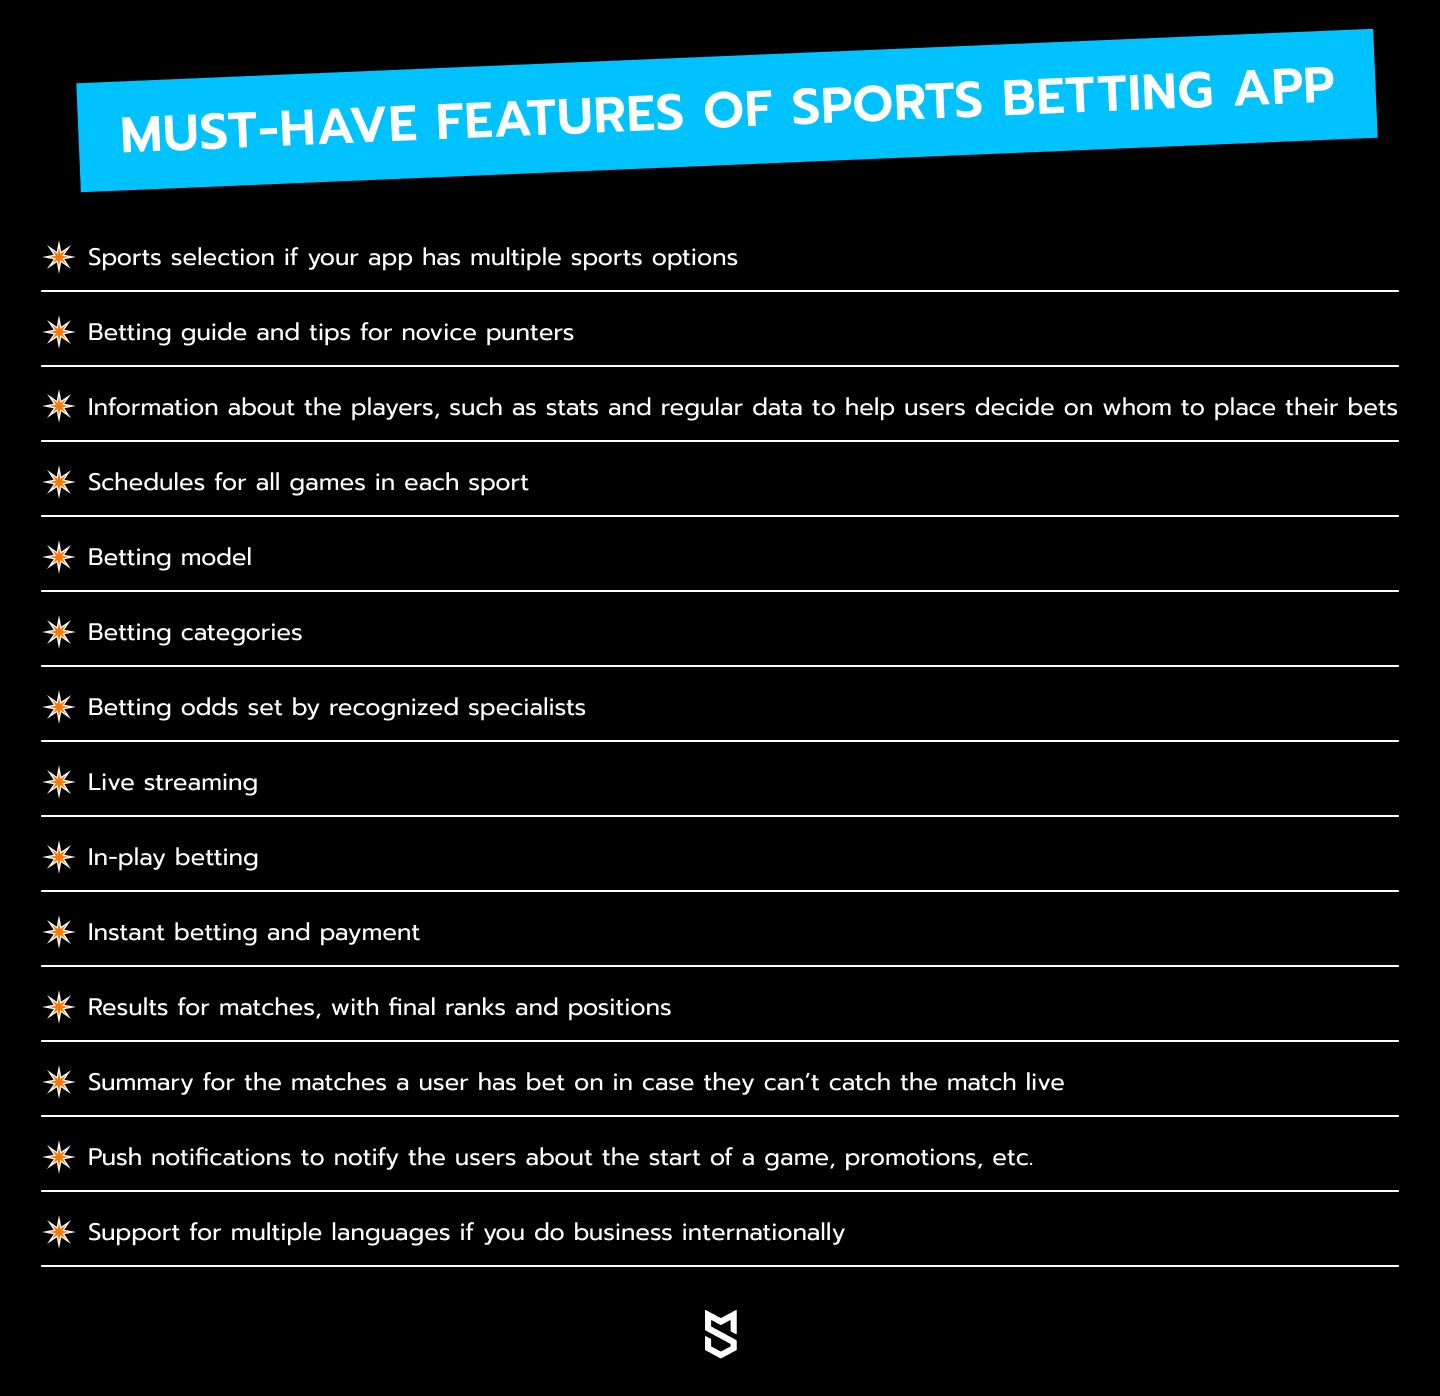 Must-have features of sports betting app